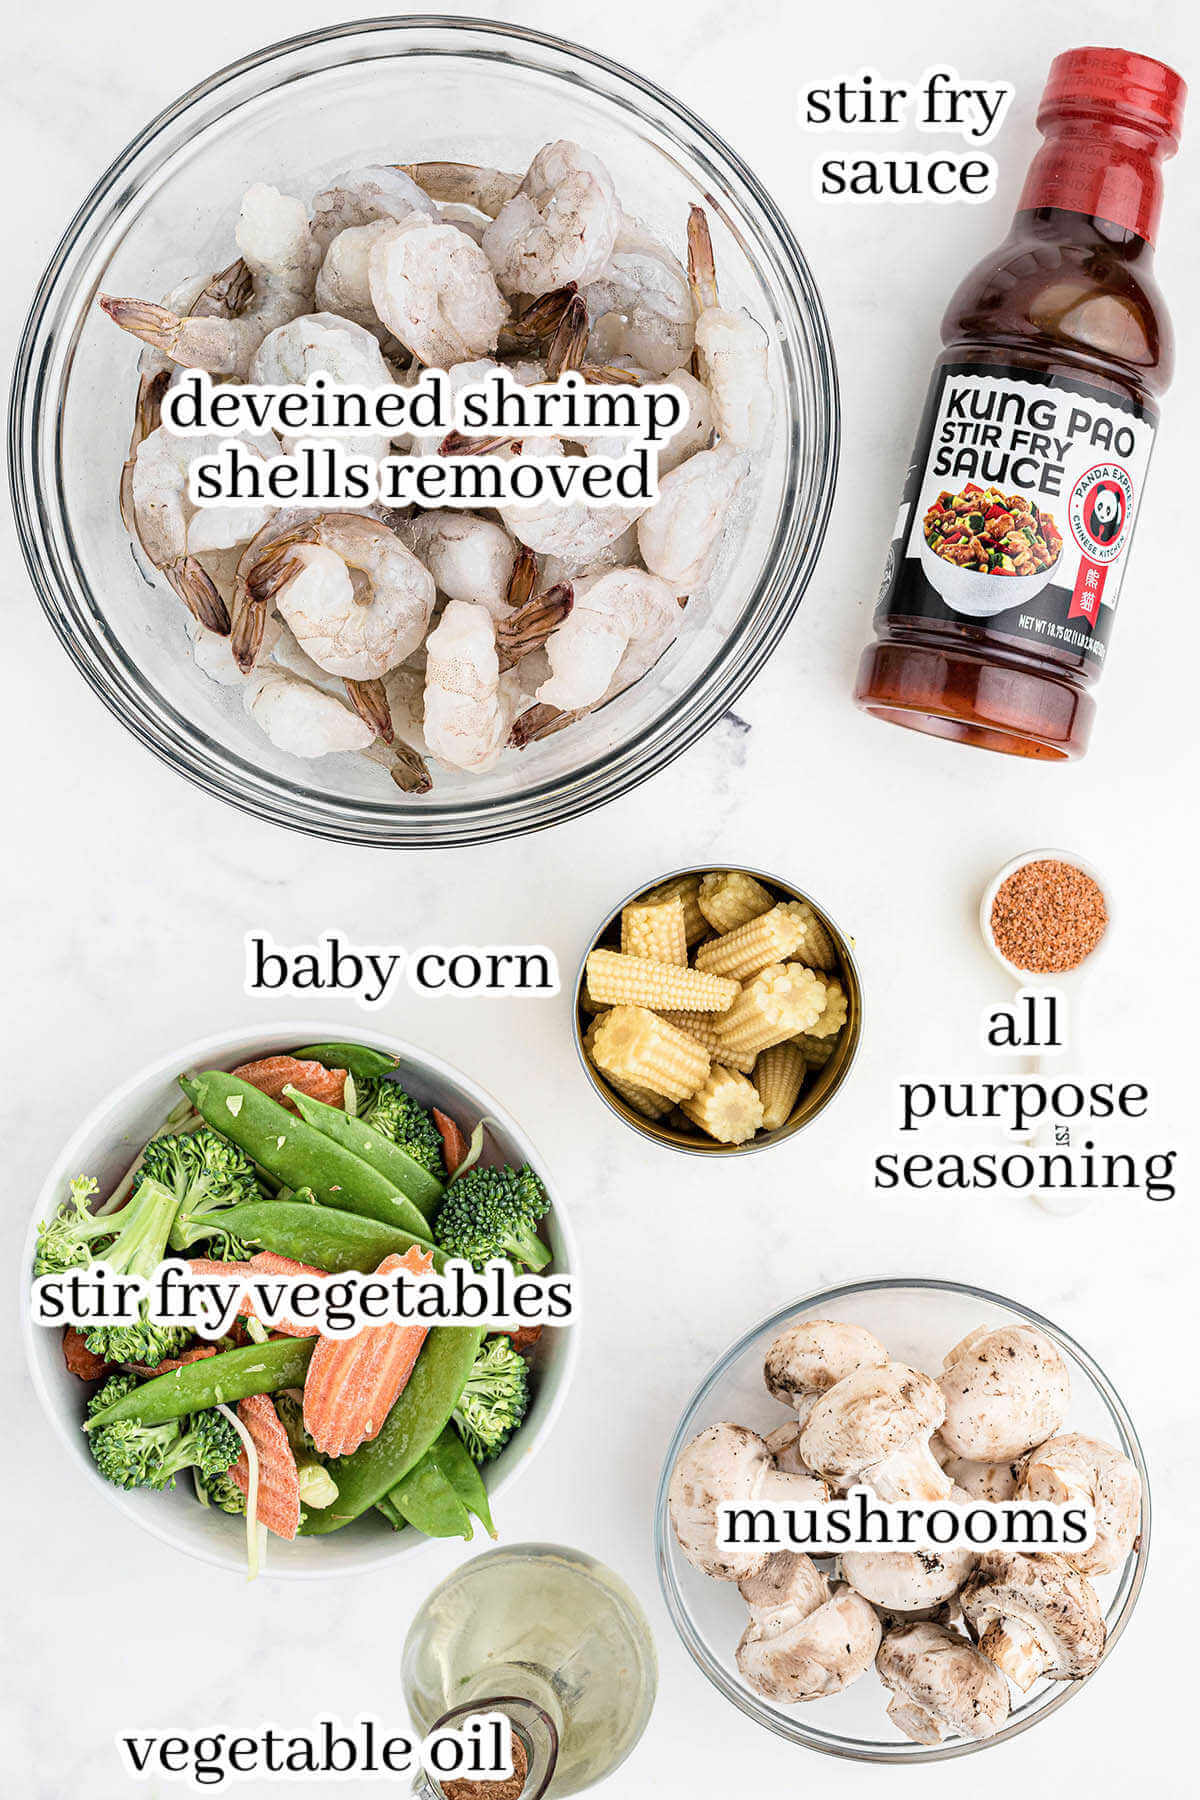 Ingredients for stir fry recipes, with print overlay.